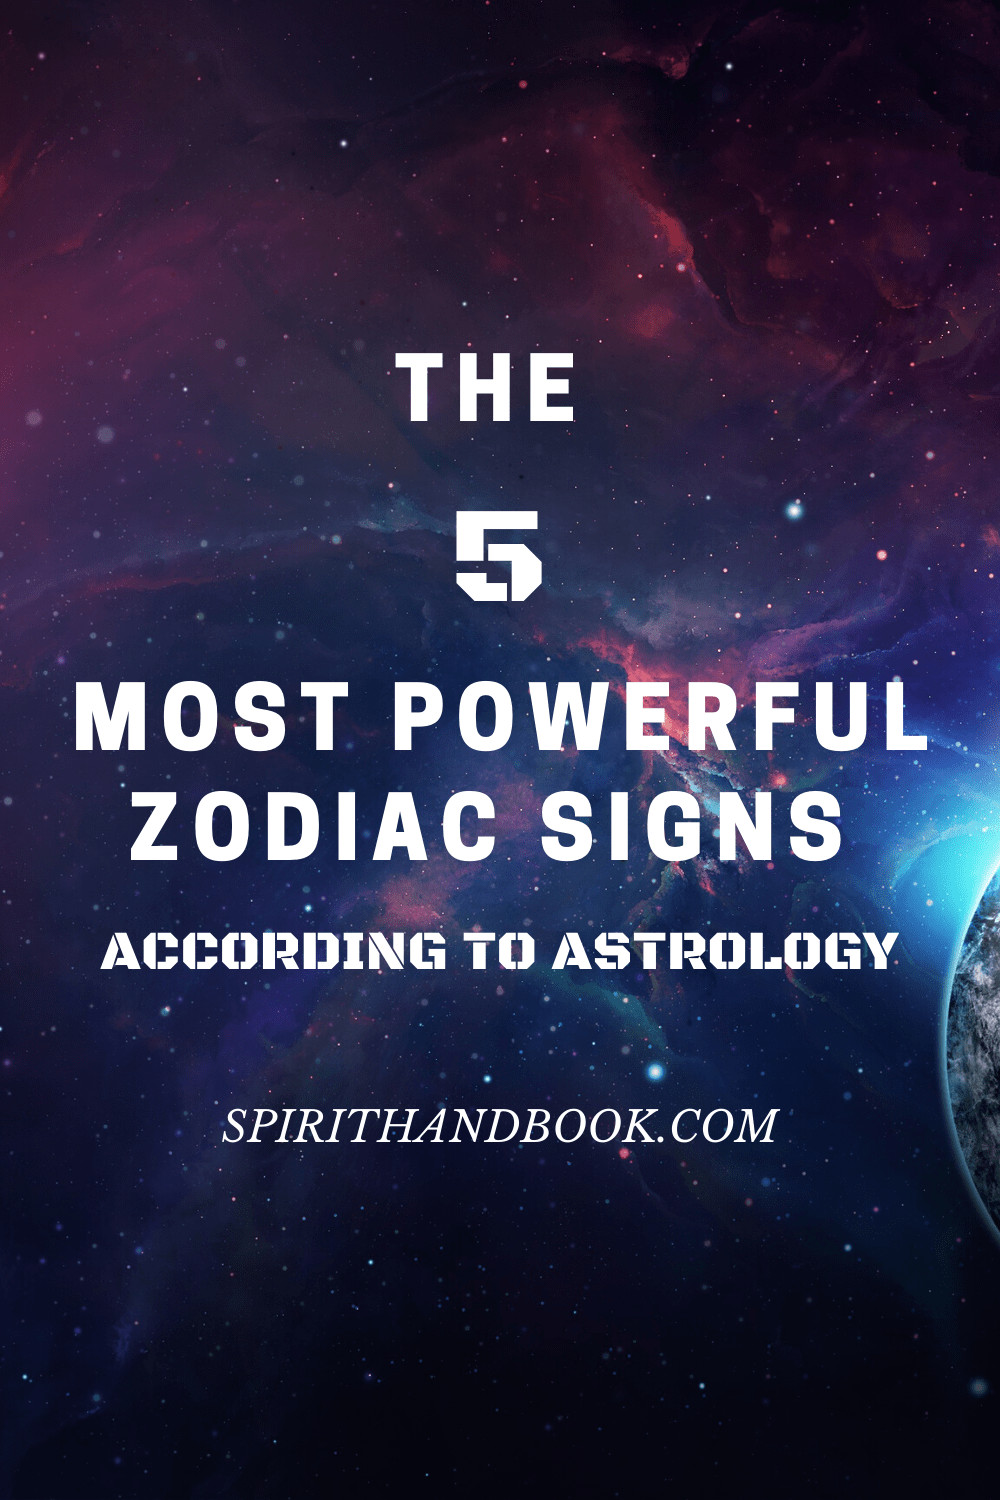 Zodiac is powerful sign most what the The Most